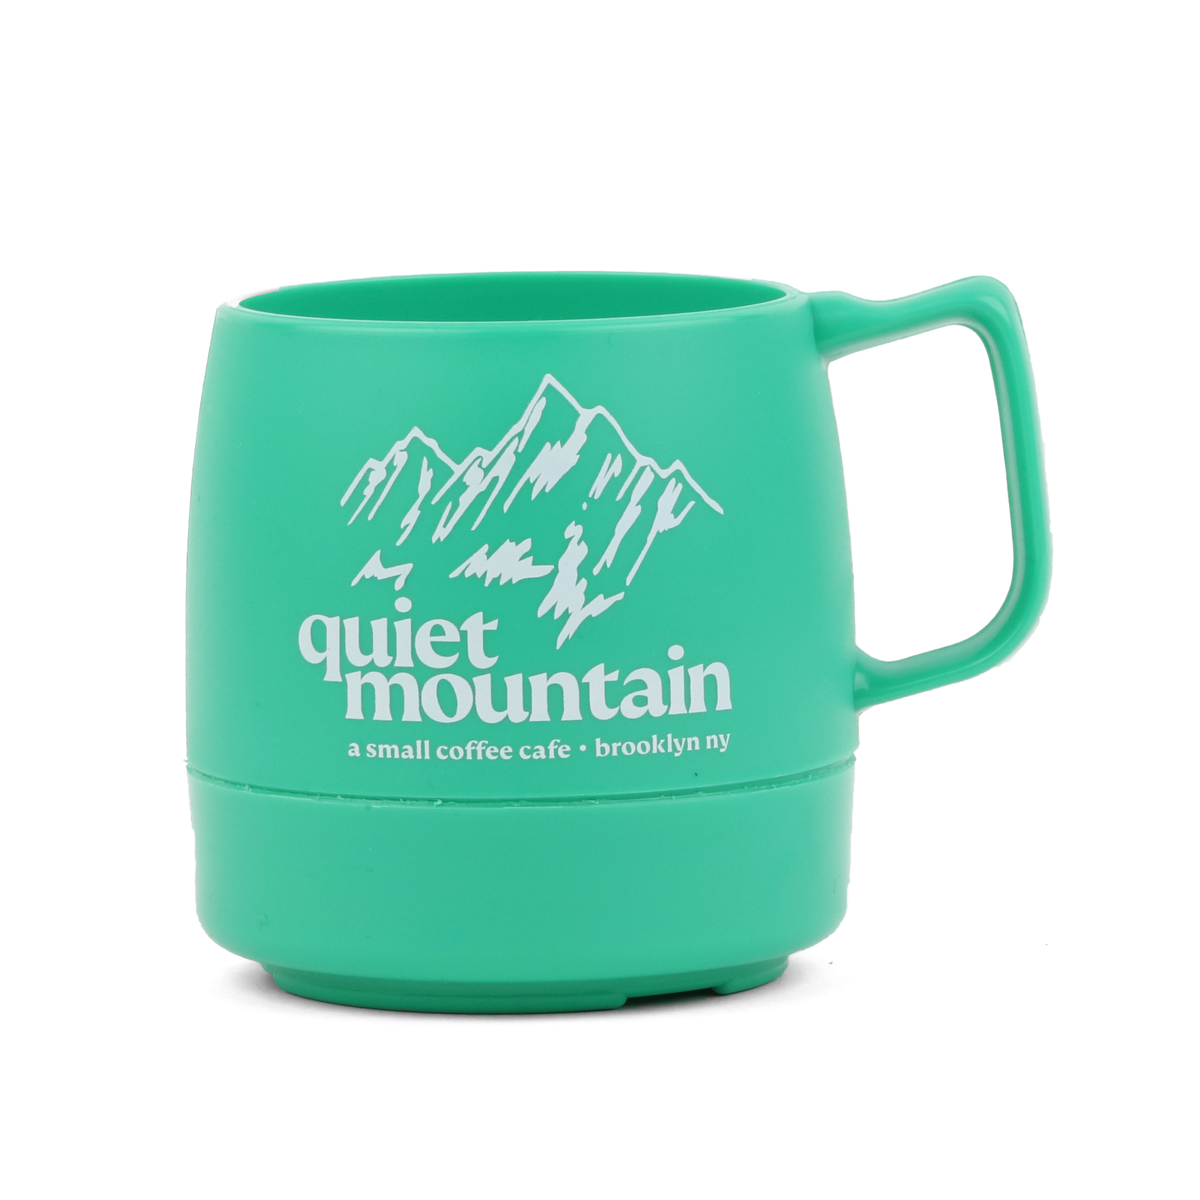 right side product mug - quiet mountain cafe